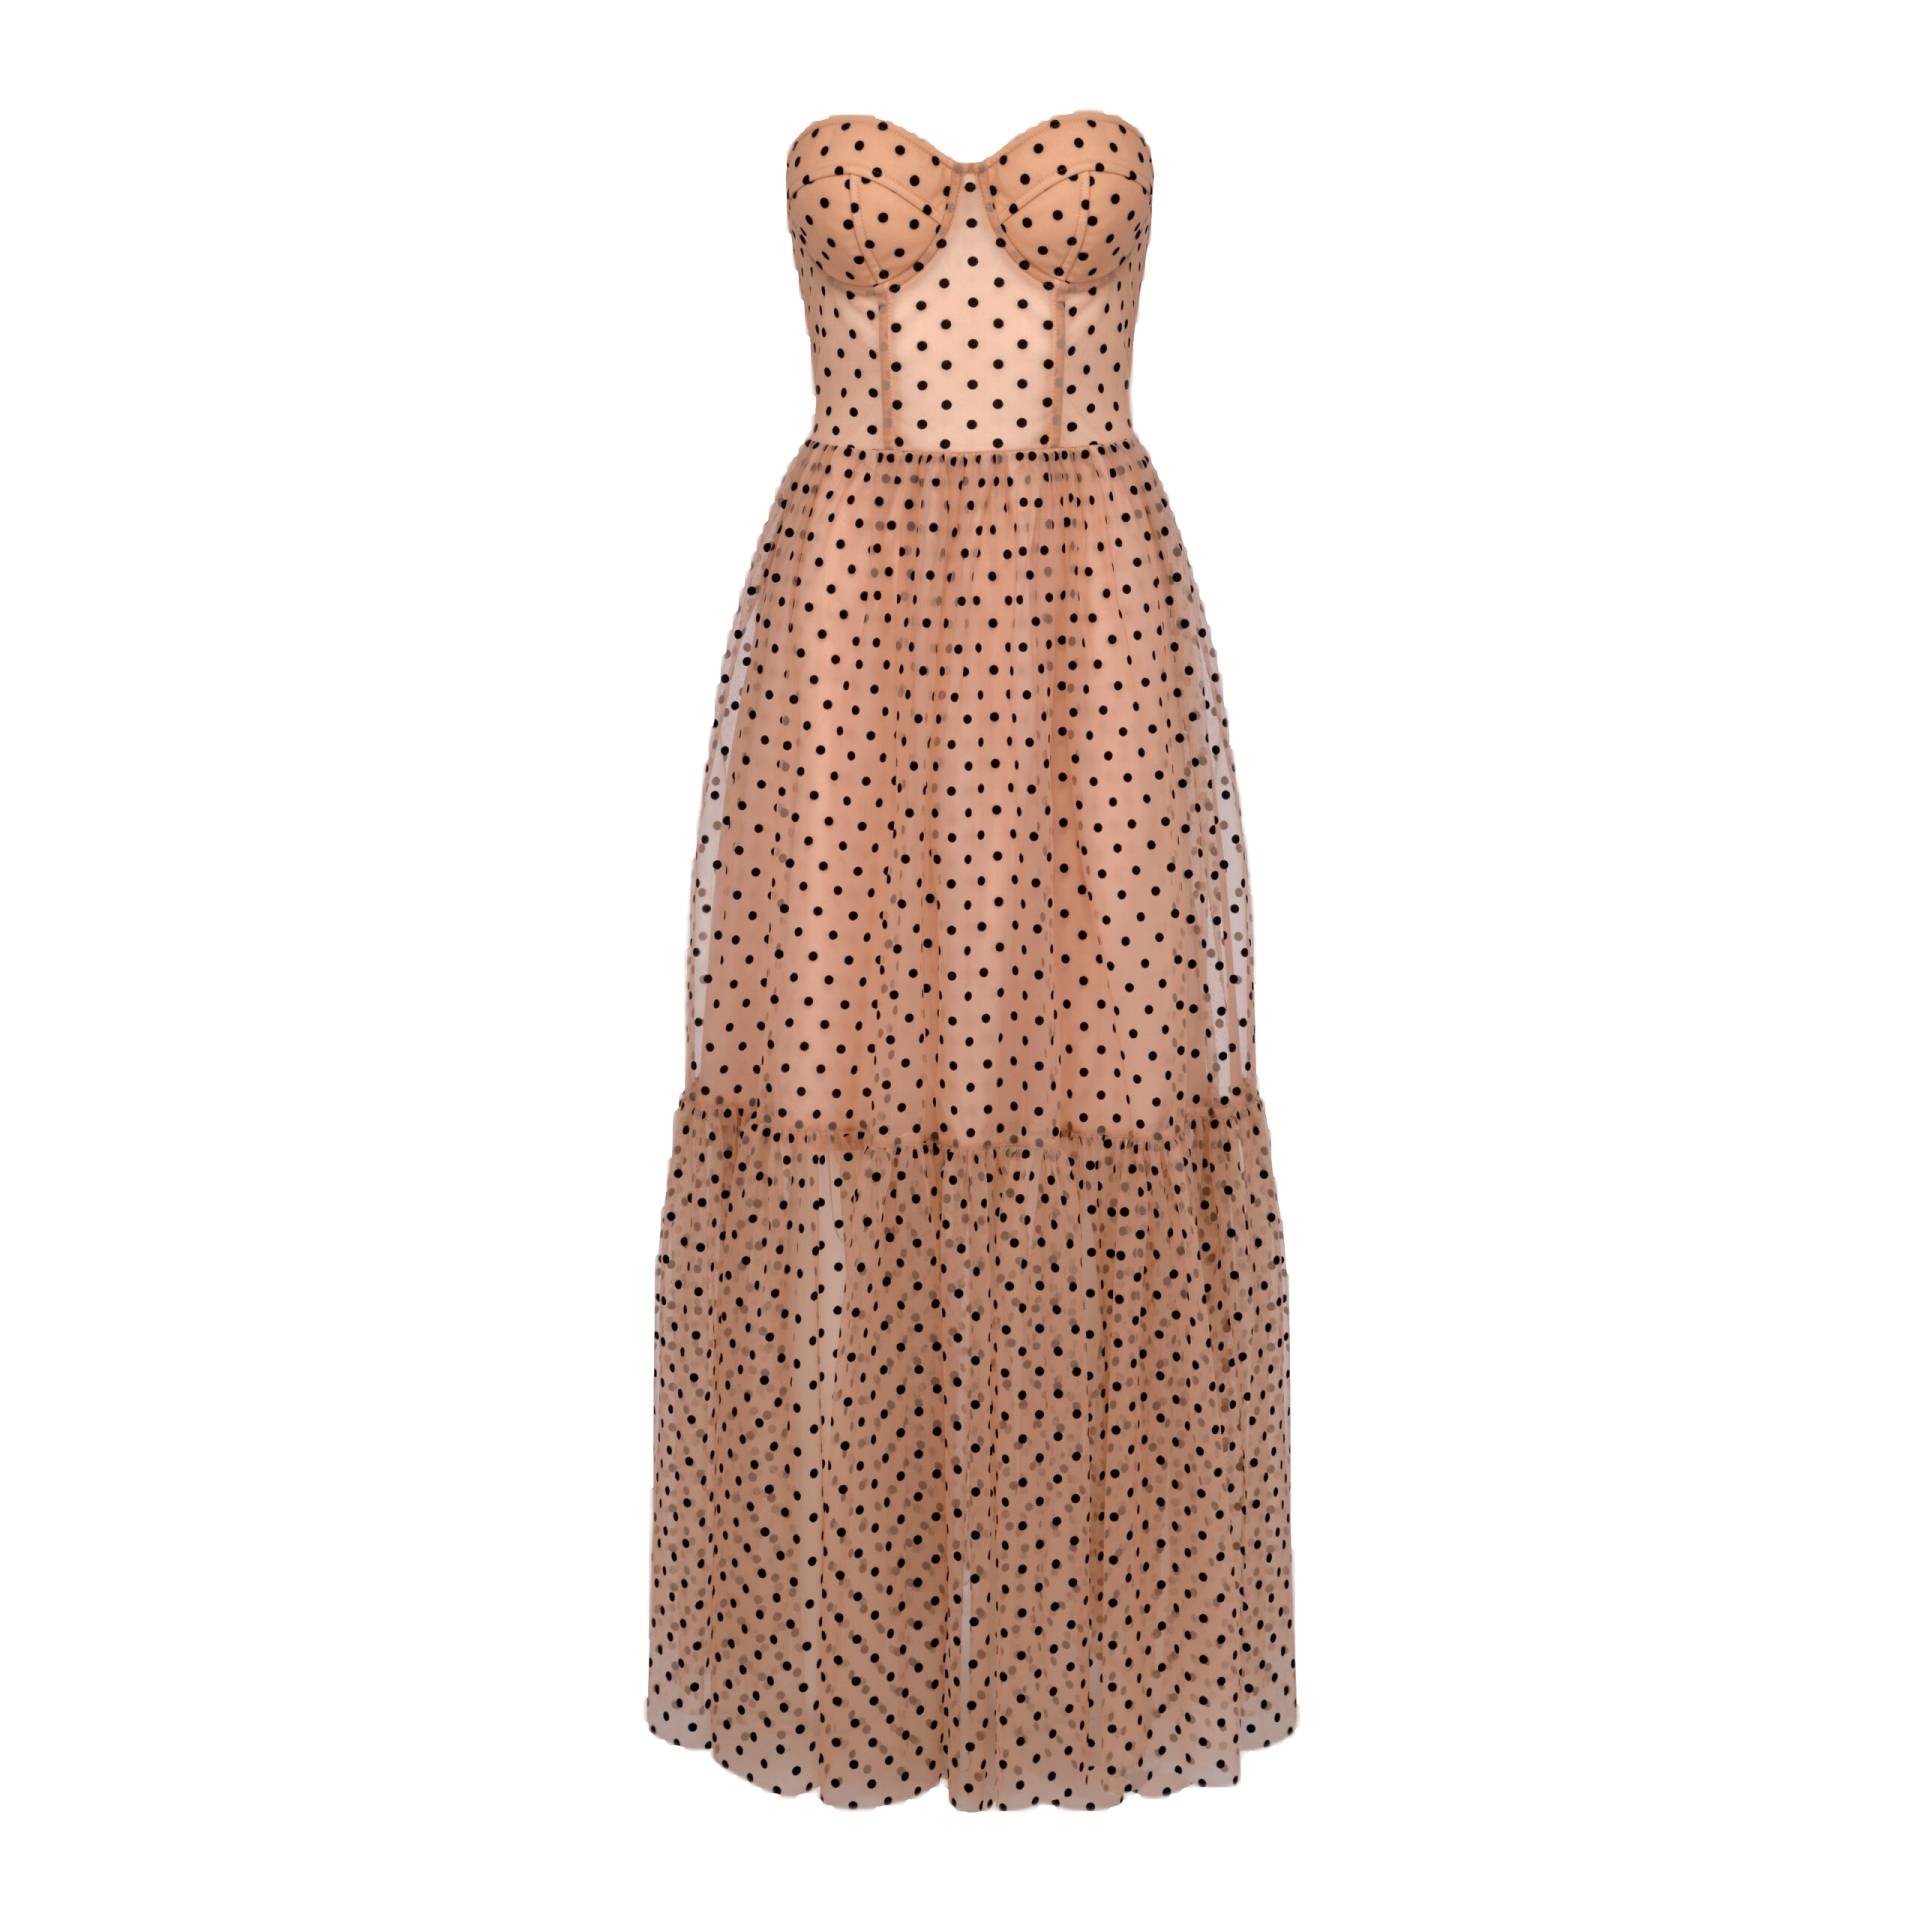 Charming dress made of tulle with flocked dots von Lily Was Here